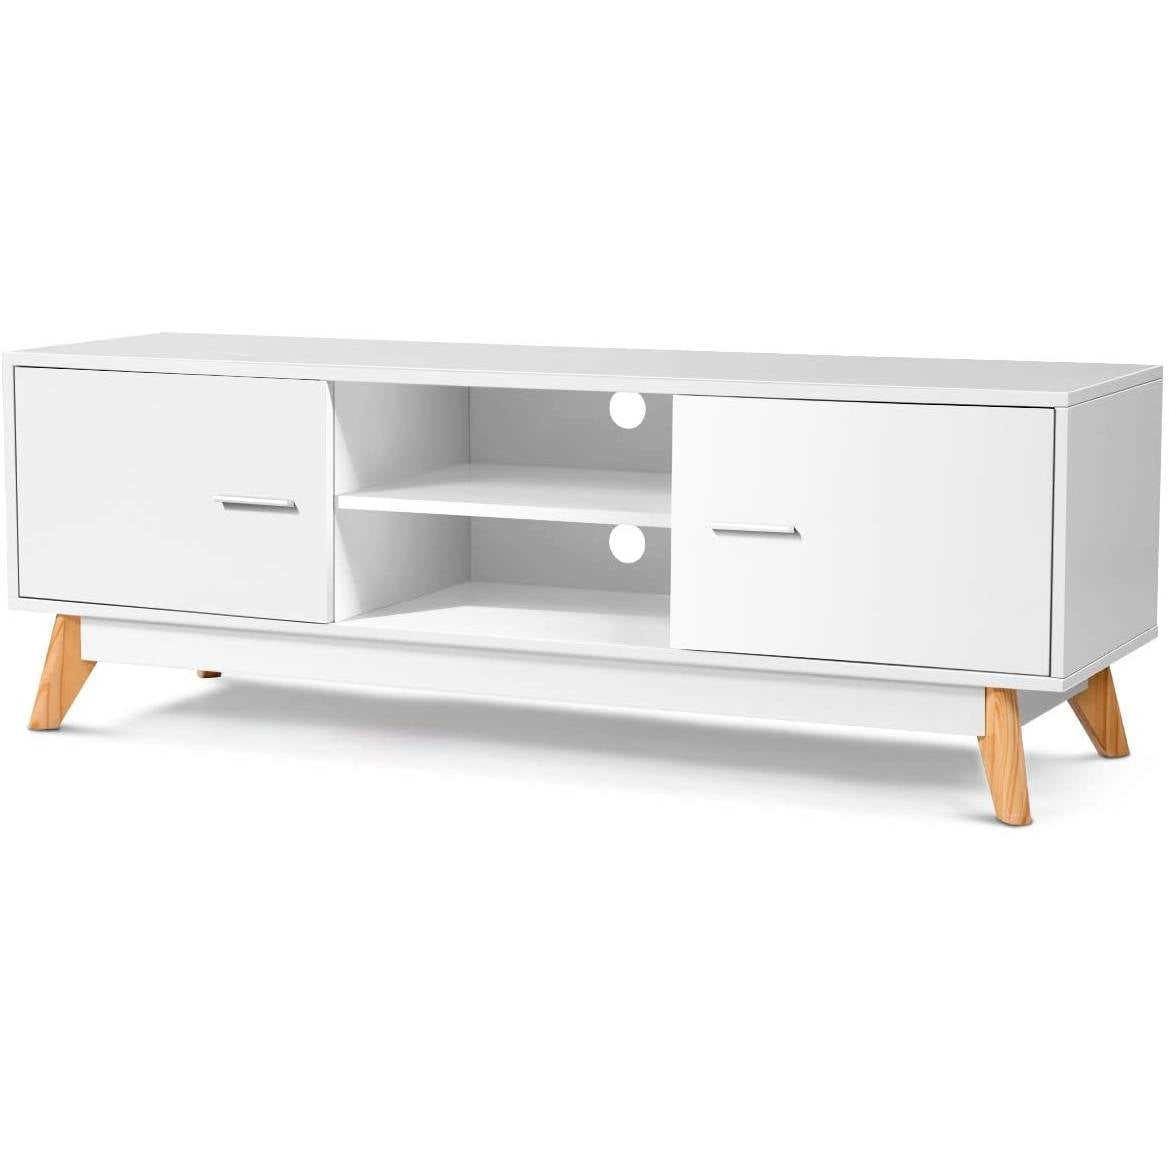 Living Room > TV Stands And Entertainment Centers - Modern 55-inch Solid Wood TV Stand In White Finish And Mid-Century Legs